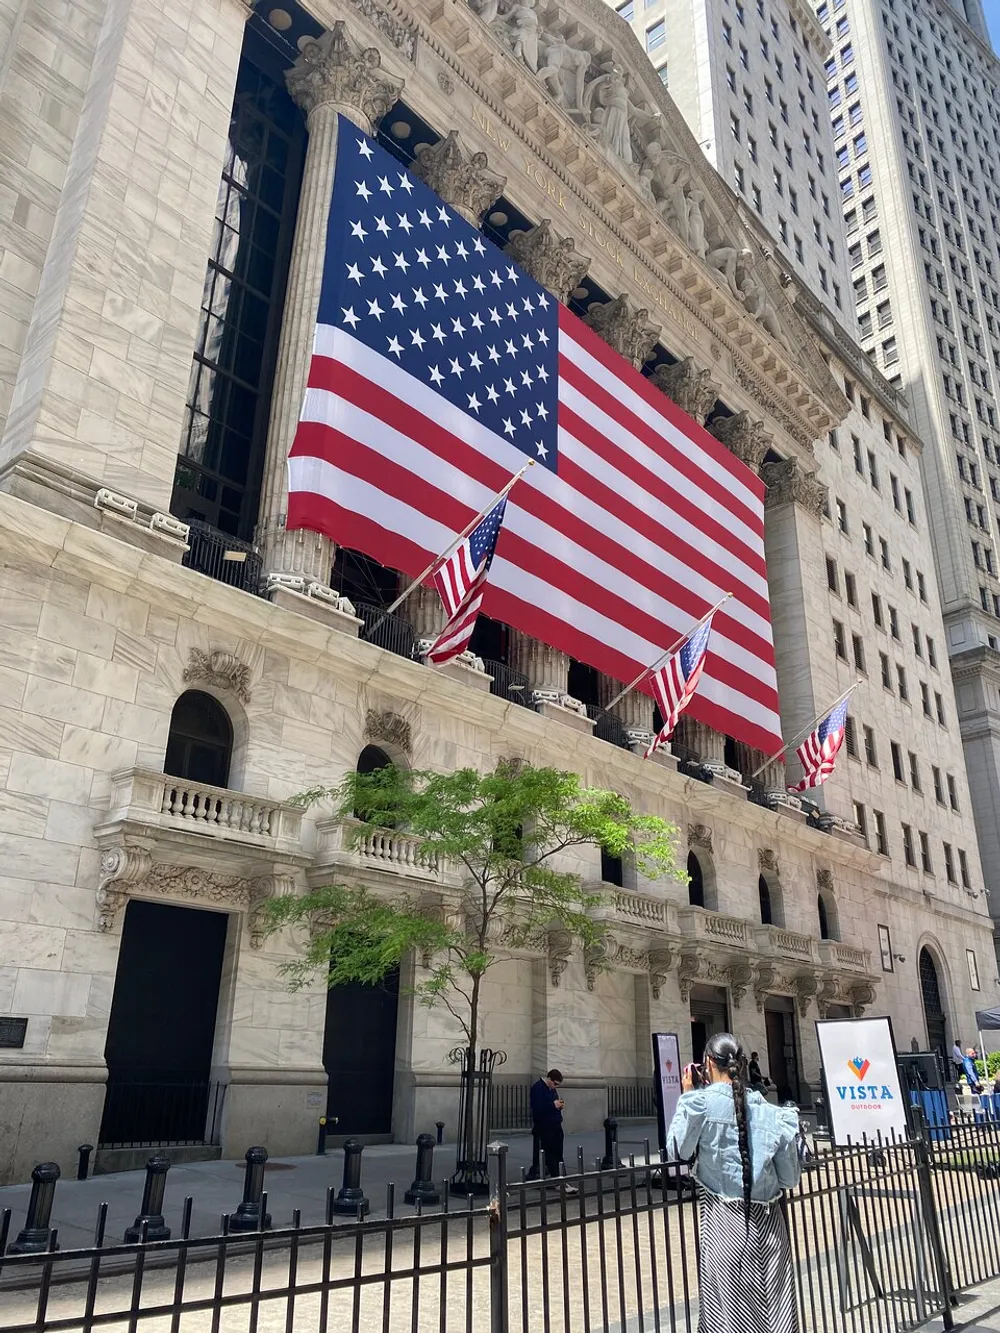 The image depicts a large American flag hanging from the facade of a stately building with Classical architecture as passersby walk in front